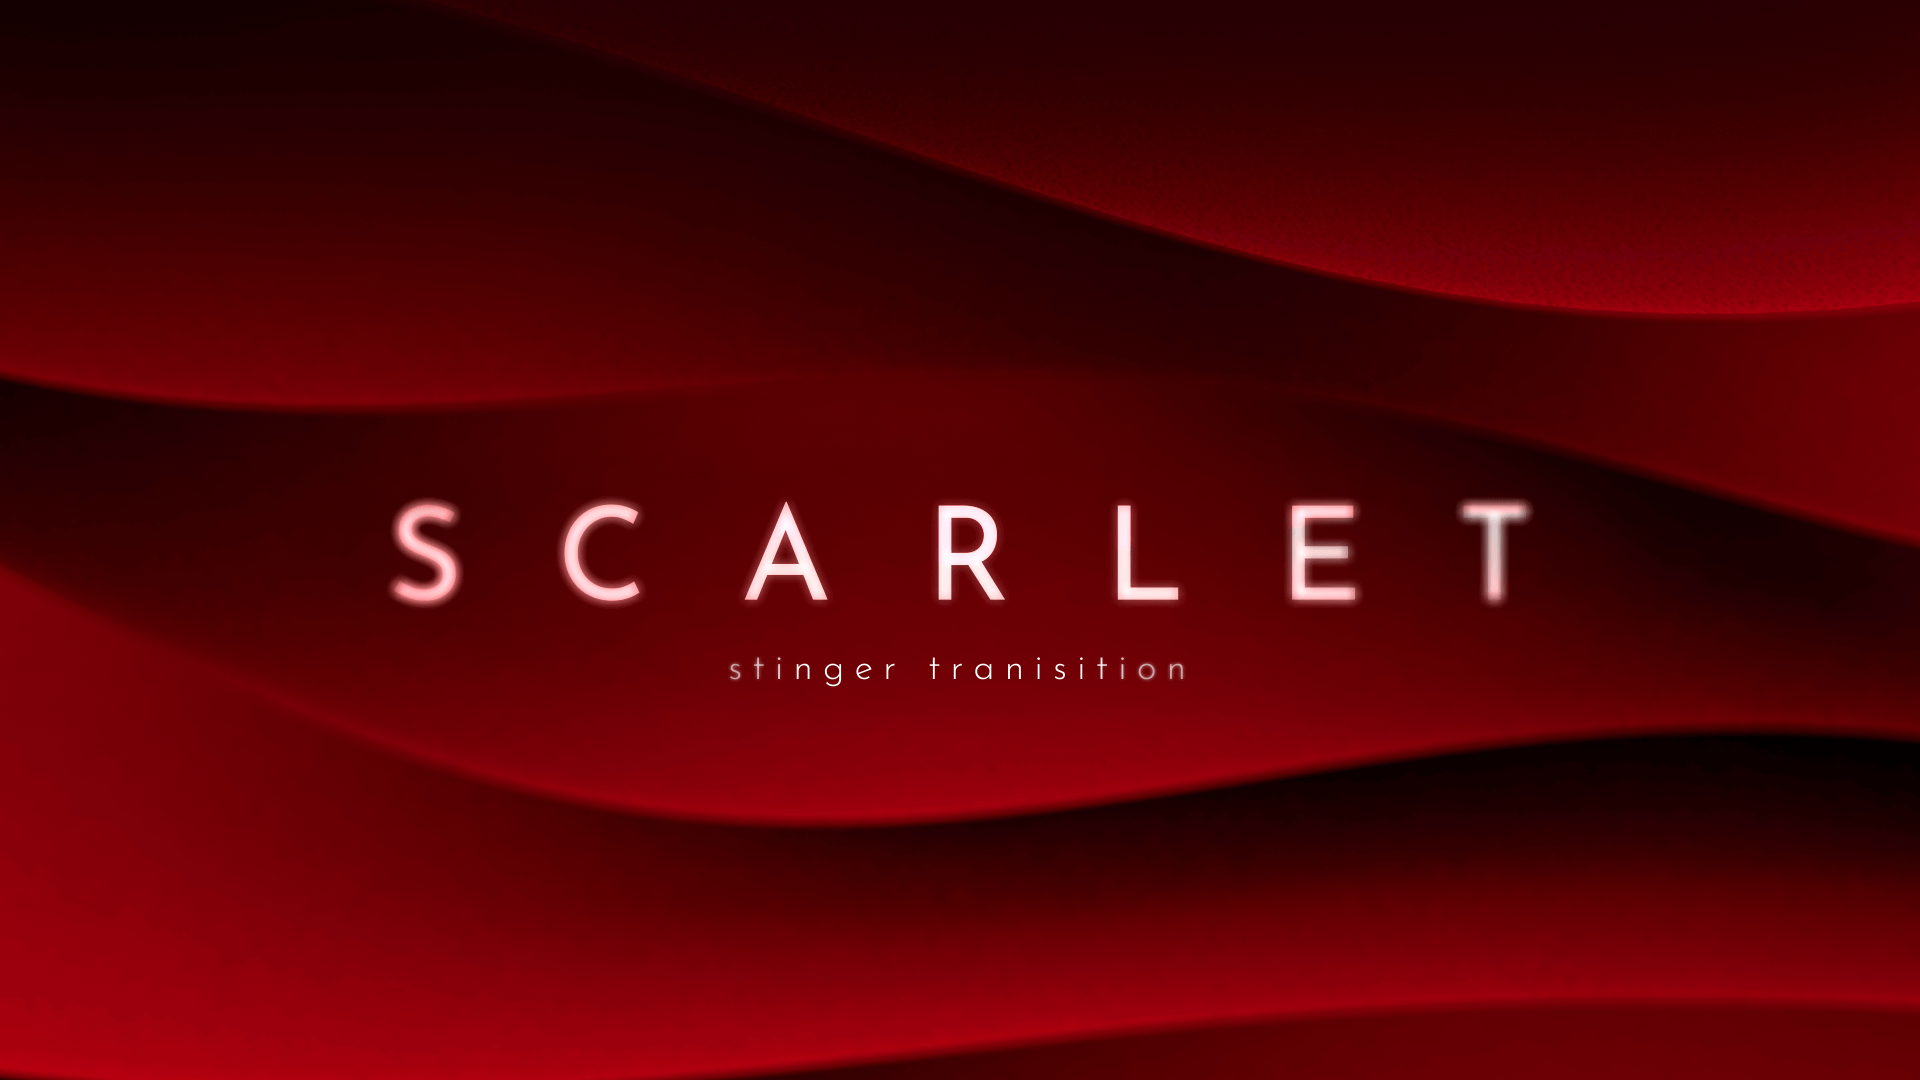 Scarlet - Stinger Transition for Twitch, Youtube and Facebook